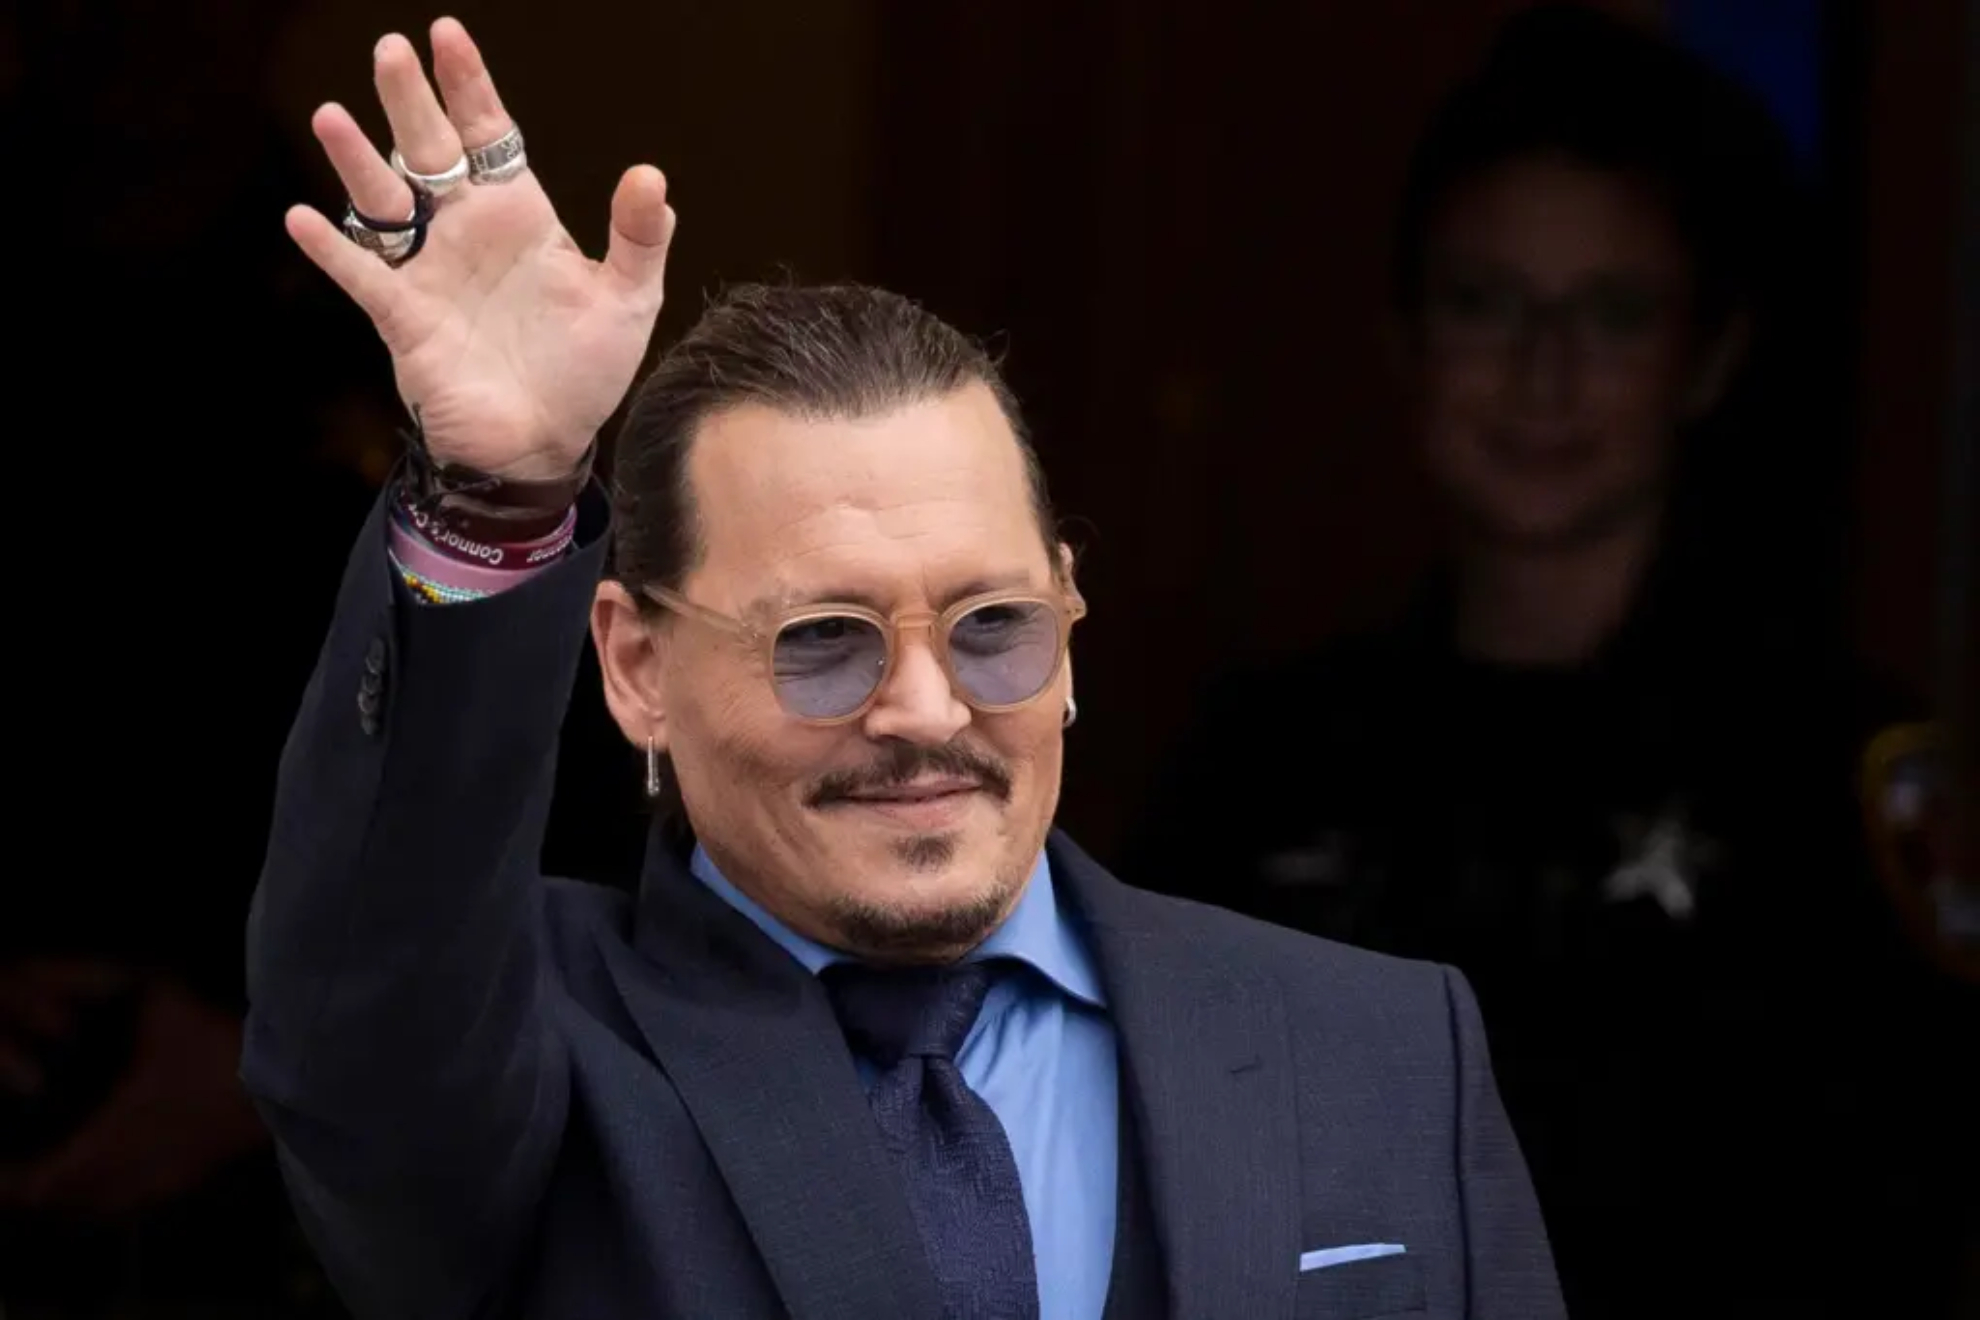 The relationship between Johnny Depp and the Saudi prince who ordered the execution of a journalist in 2018